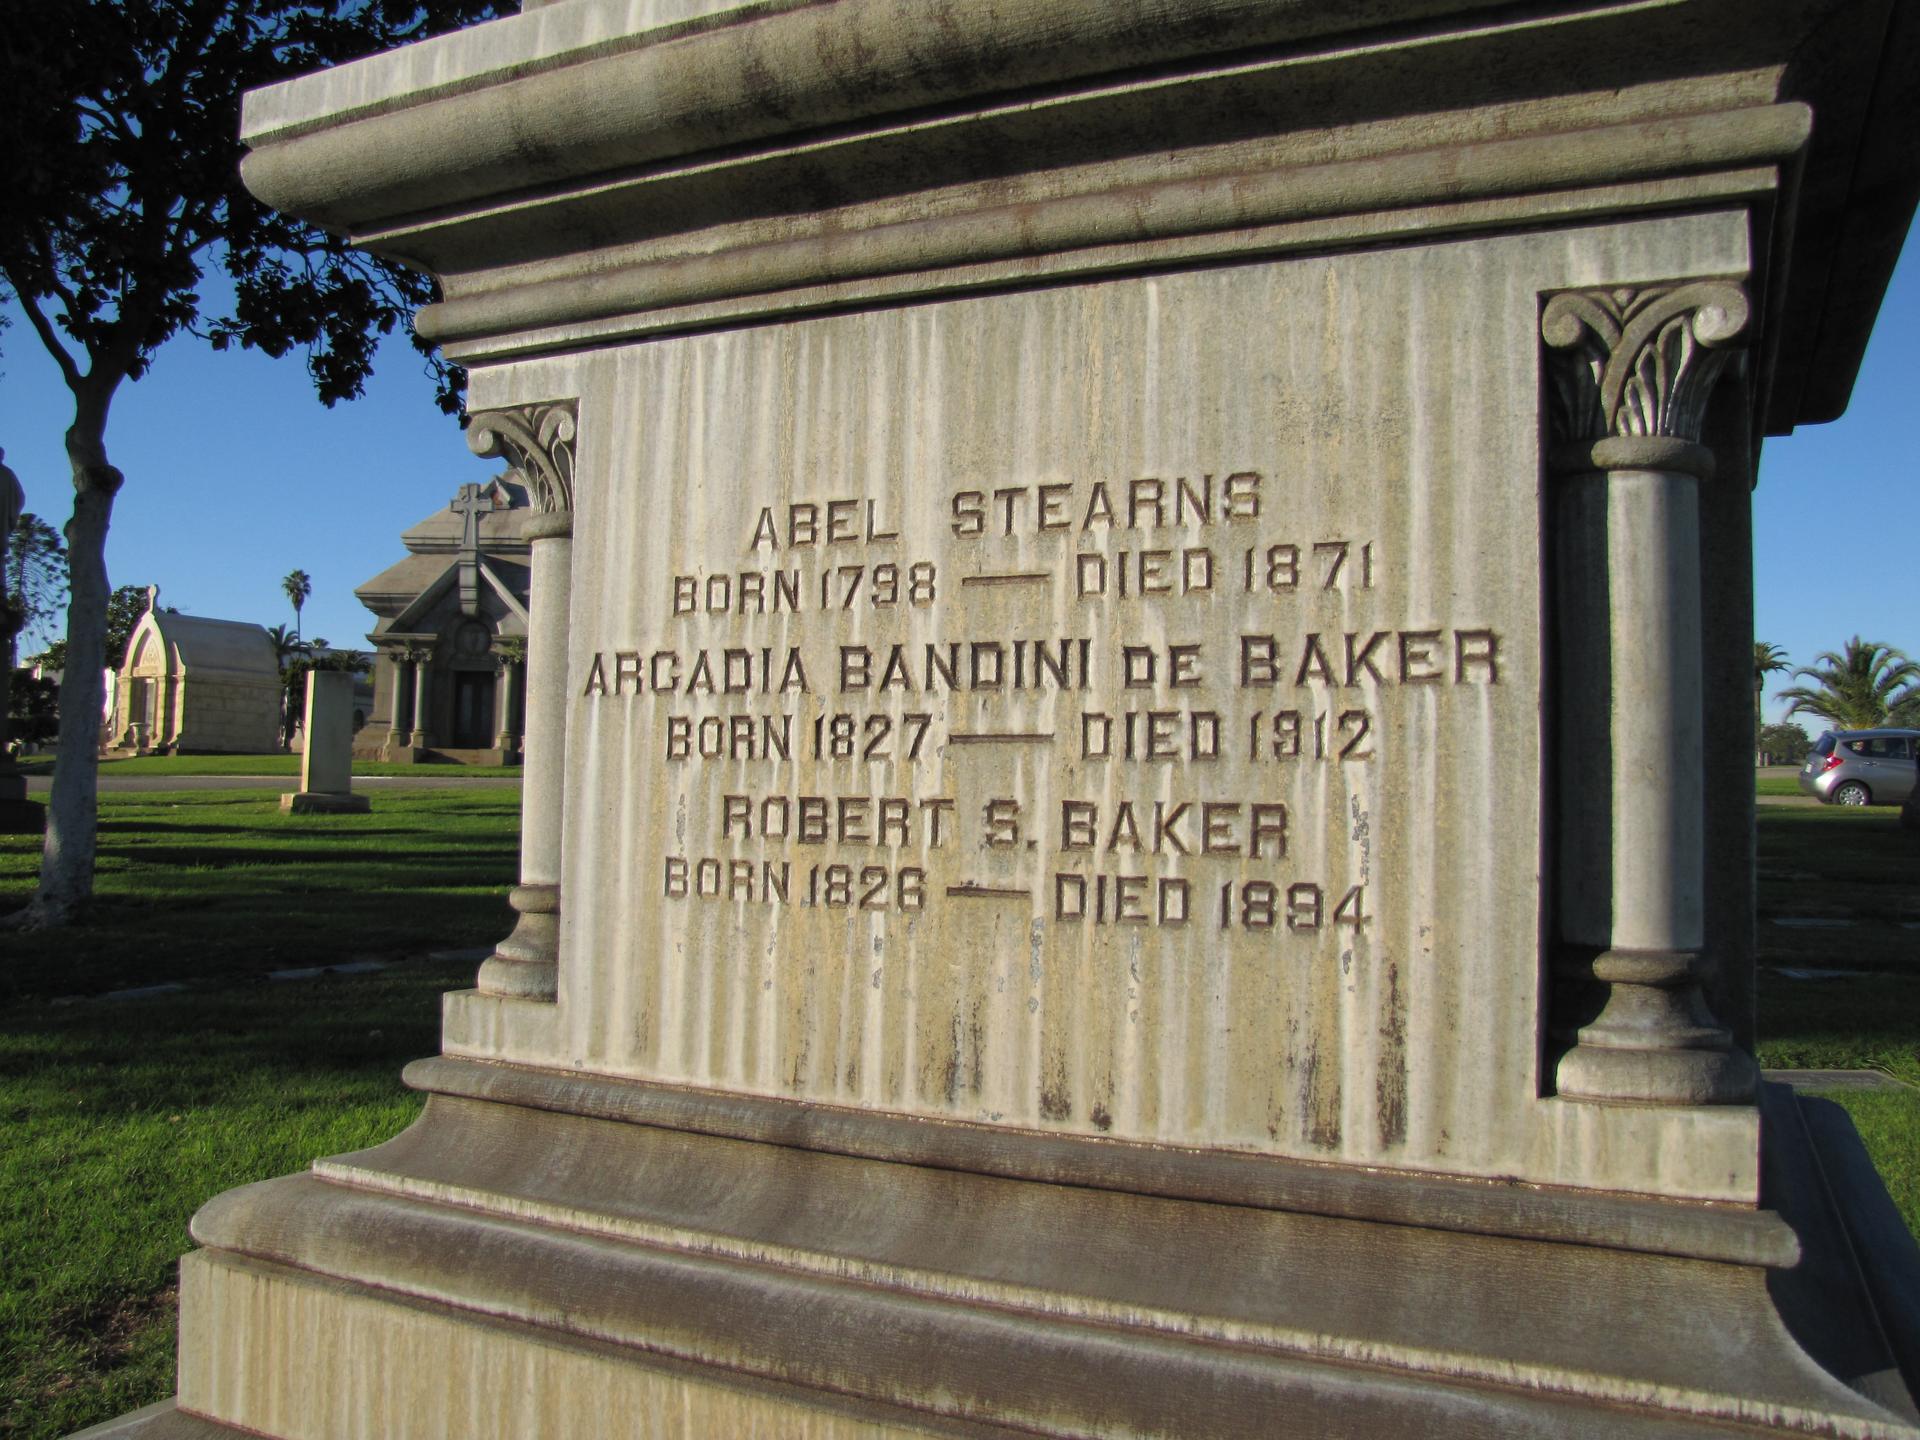 The grave of Abel Stearns and his wife Arcadia Bandini at the Calvary Cemetery near East LA.